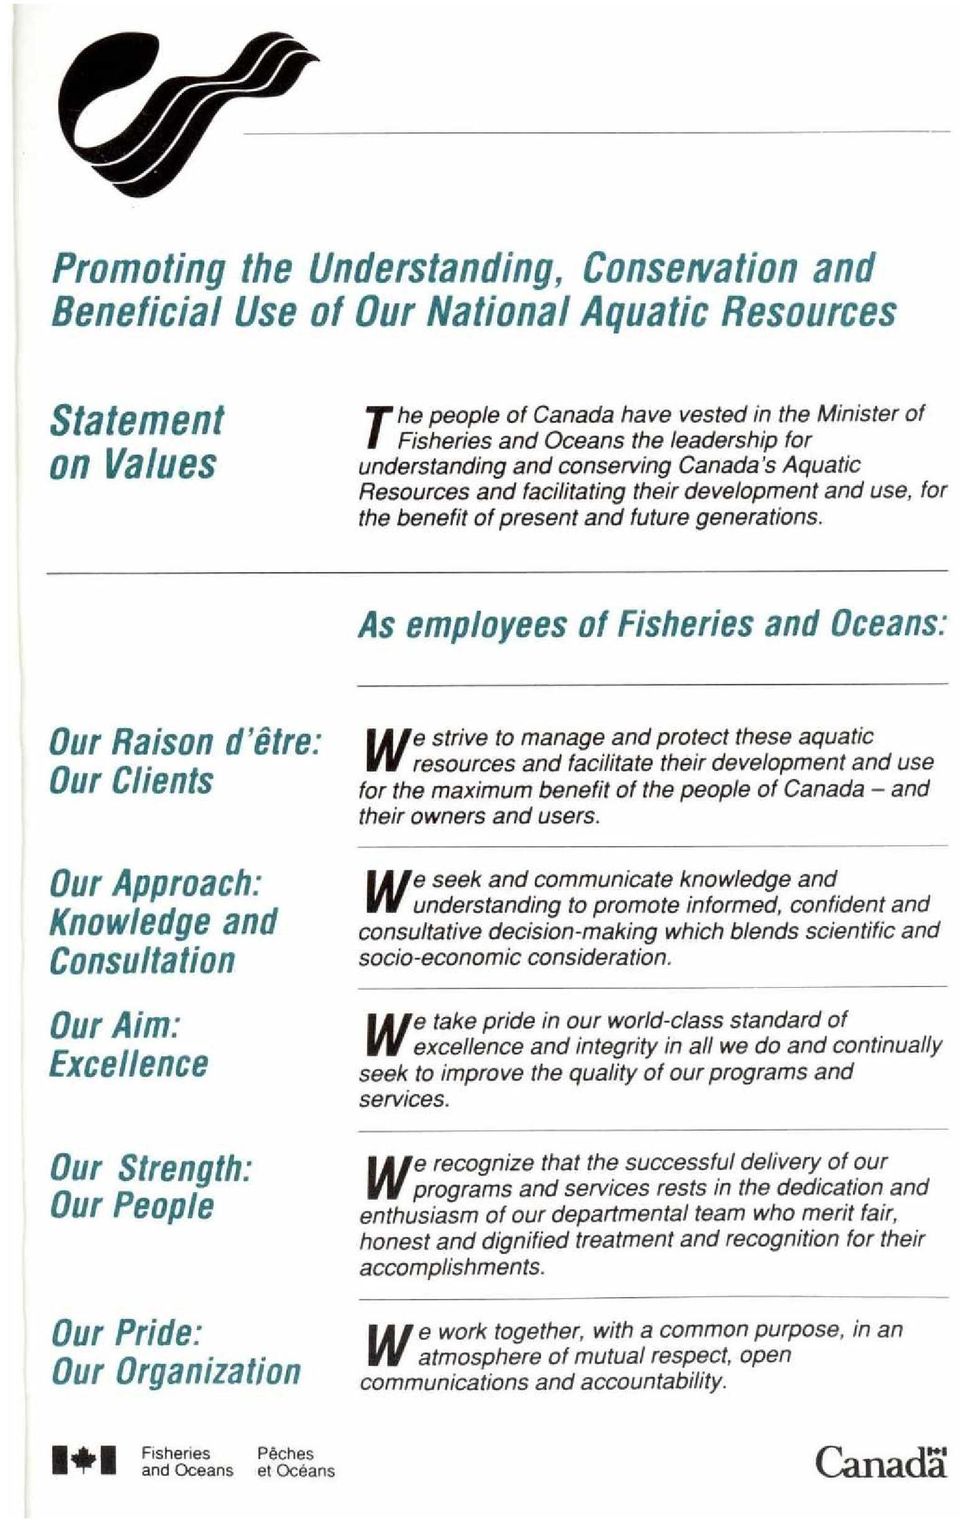 As employees of Fisheries and Oceans: Our Raison d'être: Our Clients Our Approach: Knowledge and Consultation Our Aim: Excellence Our Strength: Our People Our Pride: Our Organization We strive to